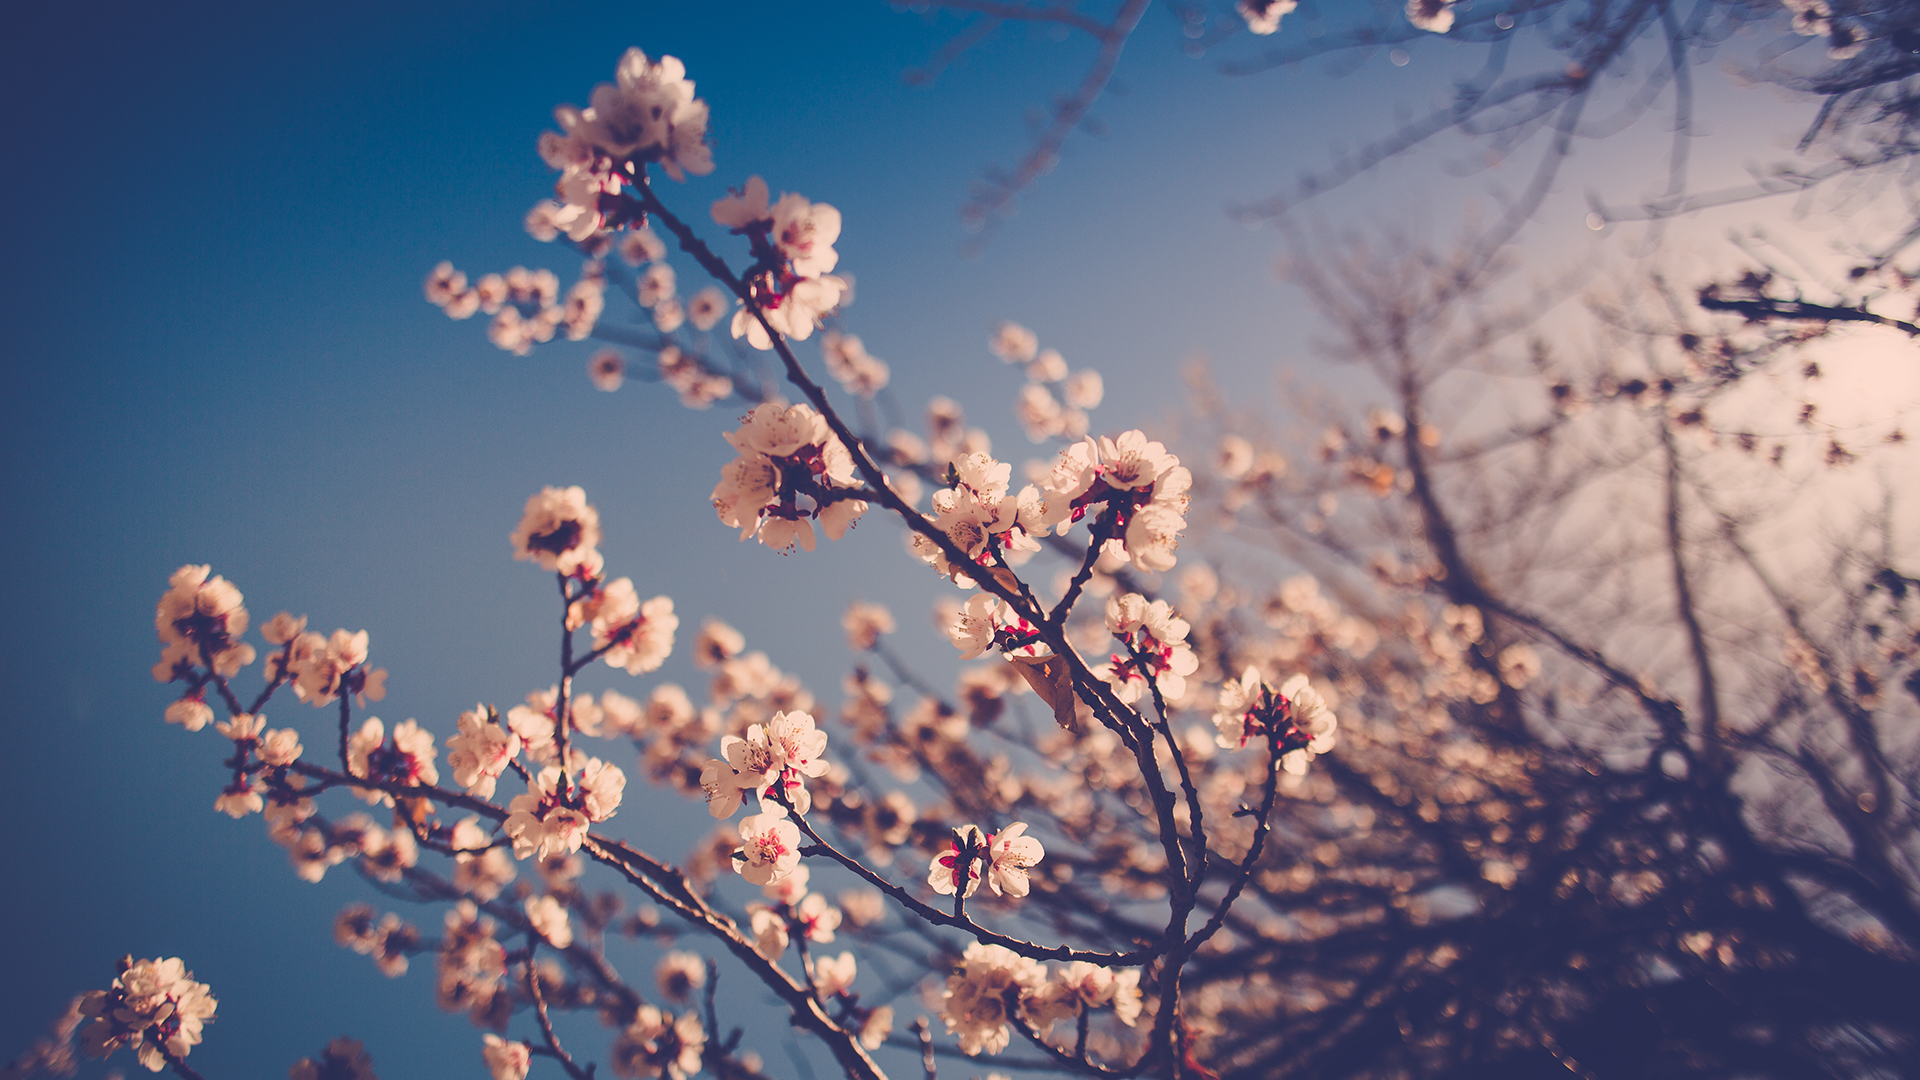 General 1920x1080 nature flowers cherry blossom sky blurred blurry background